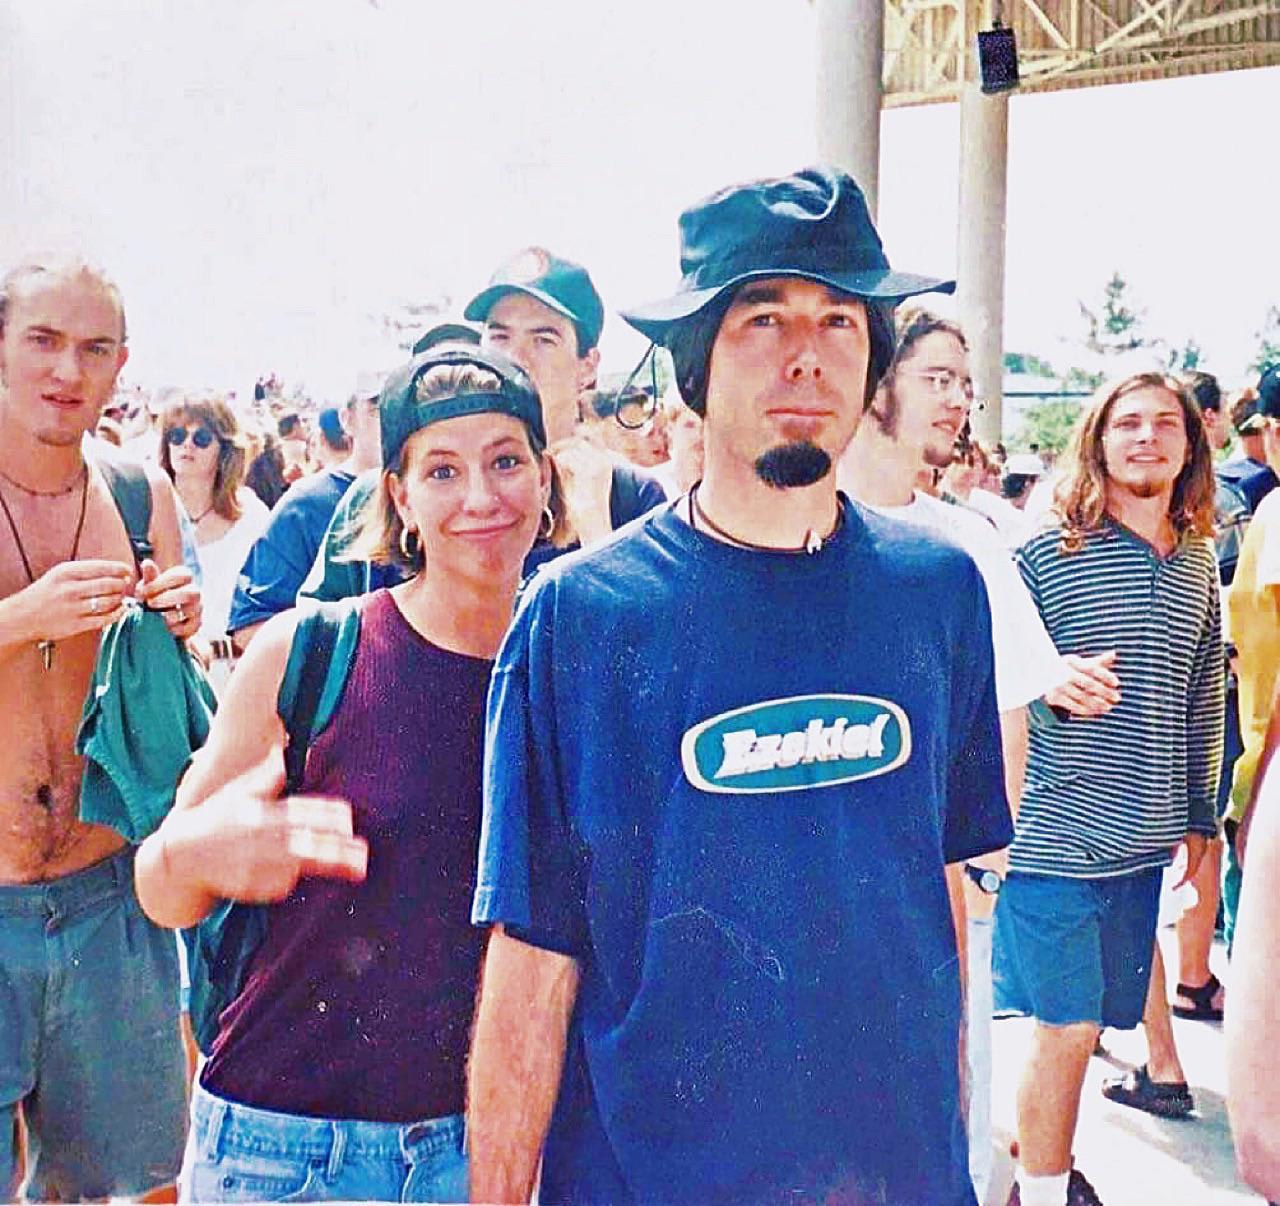 MCA from the Beastie Boys at Lollapalooza, 1994.